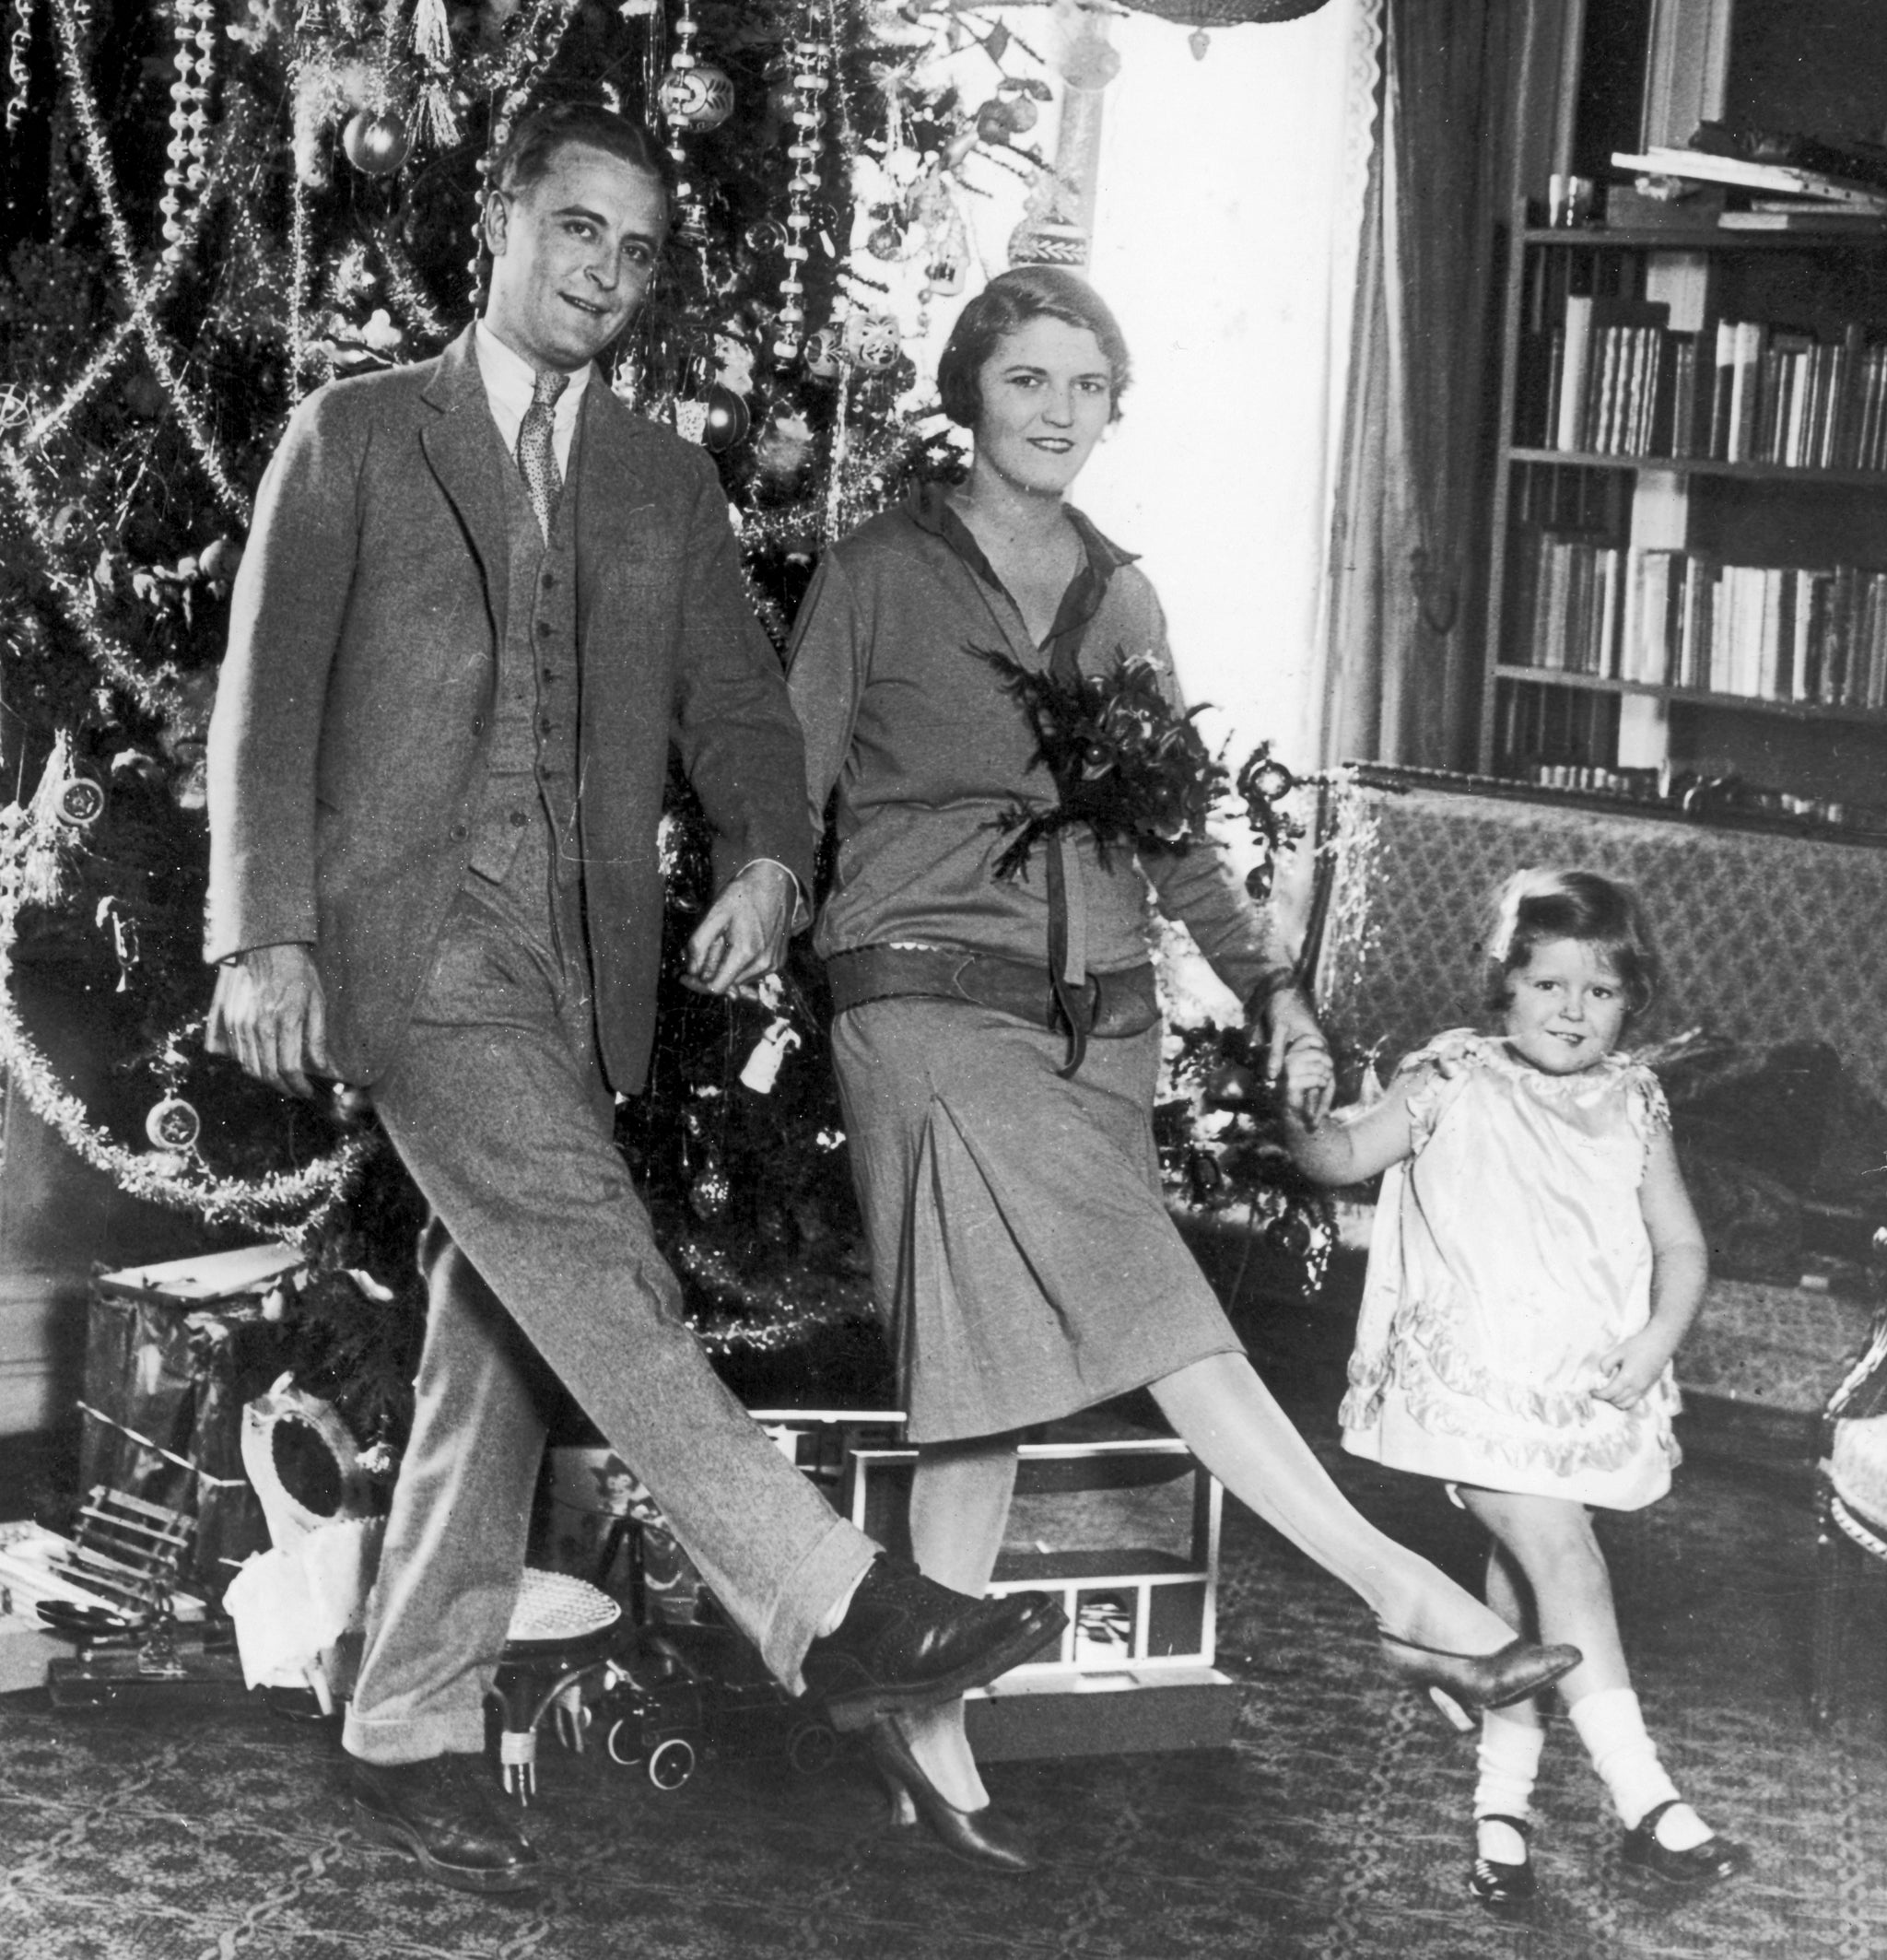 Fitzgerald, Zelda and their daughter Frances dancing at Christmas in Paris